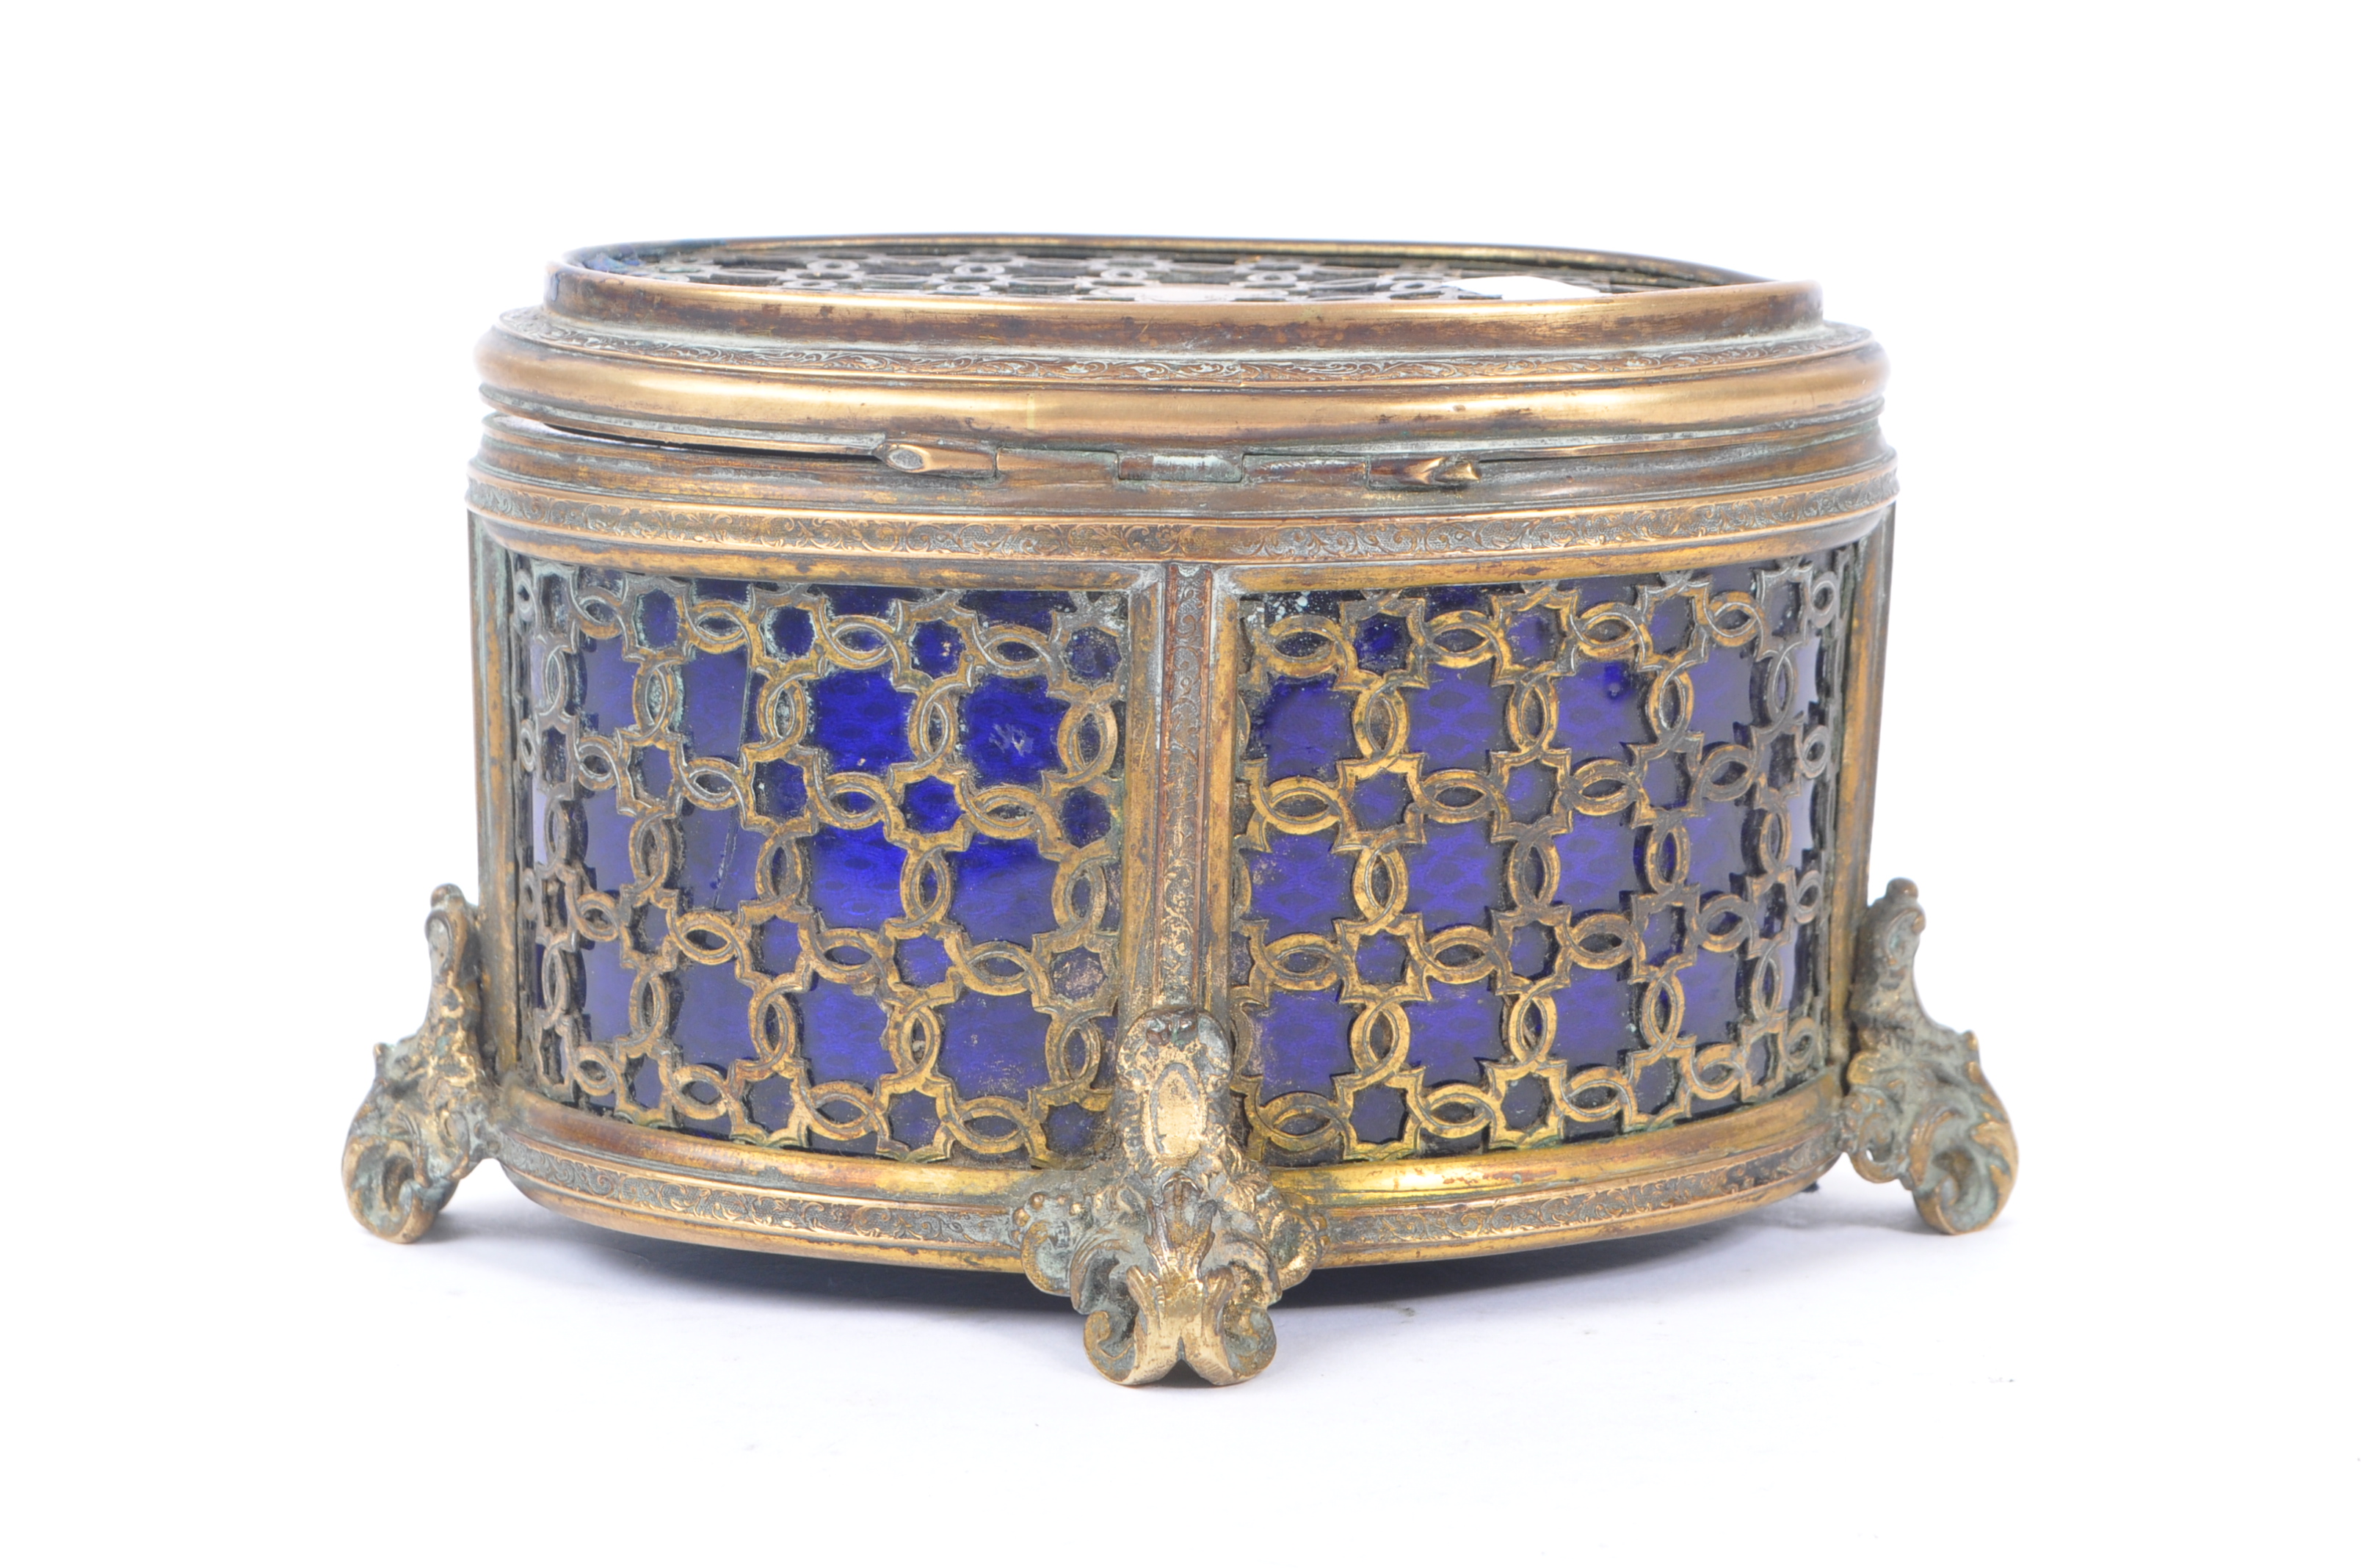 EARLY 20TH CENTURY BRASS AND BLUE GLASS TRINKET BOX - Image 3 of 6